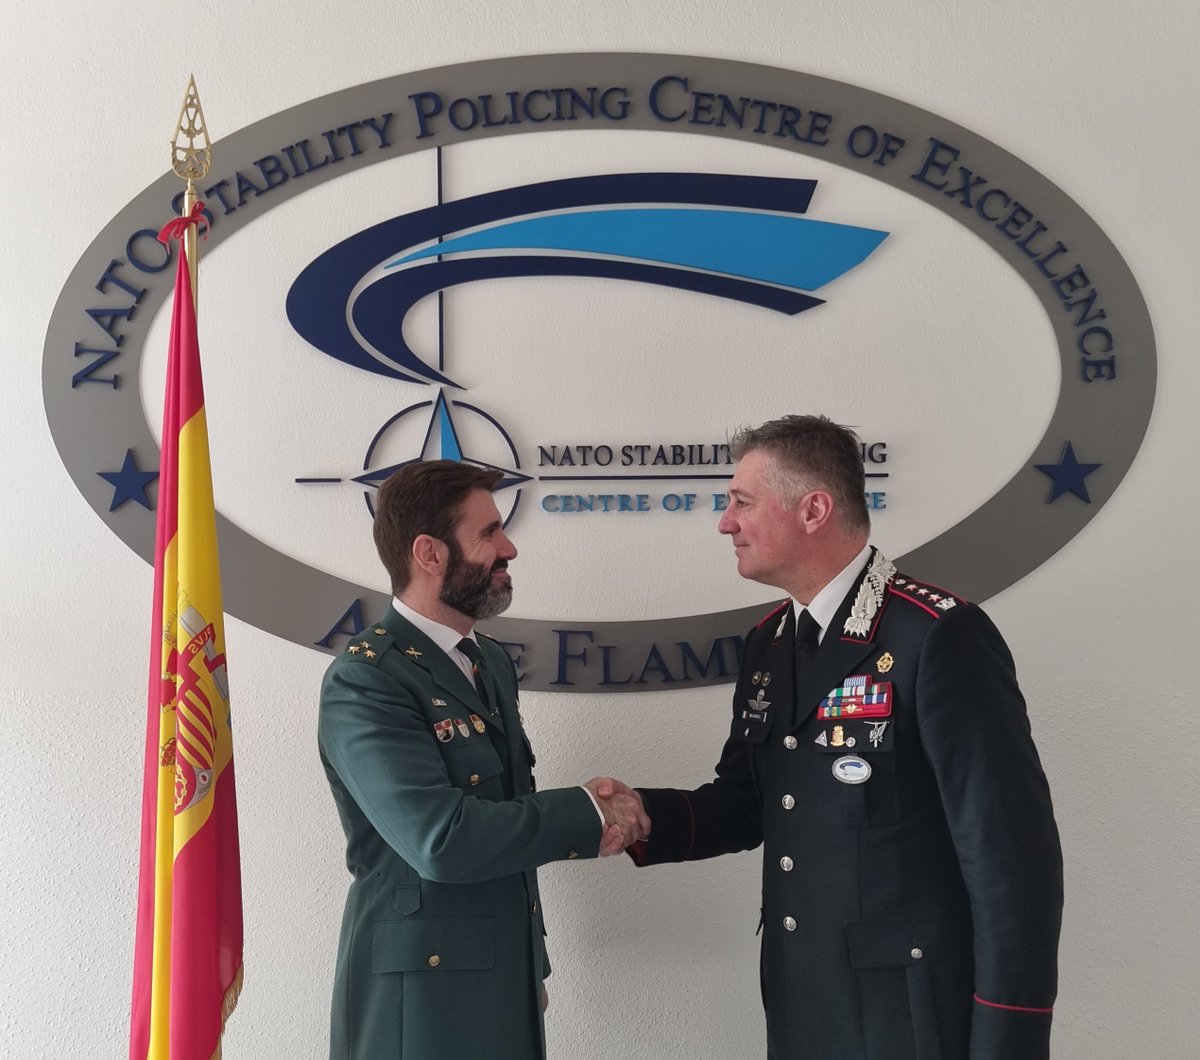 The whole staff of #NATOSPCoE thanks Capt. Juan Antonio GONZALEZ SOMOVILLA of Spanish Guardia Civil for his invaluable contribution to our activities. #Gracias Juan for your loyal support and friendship. We will be missing you! #WeAreNATO #BrothersInArms #StrongerTogether